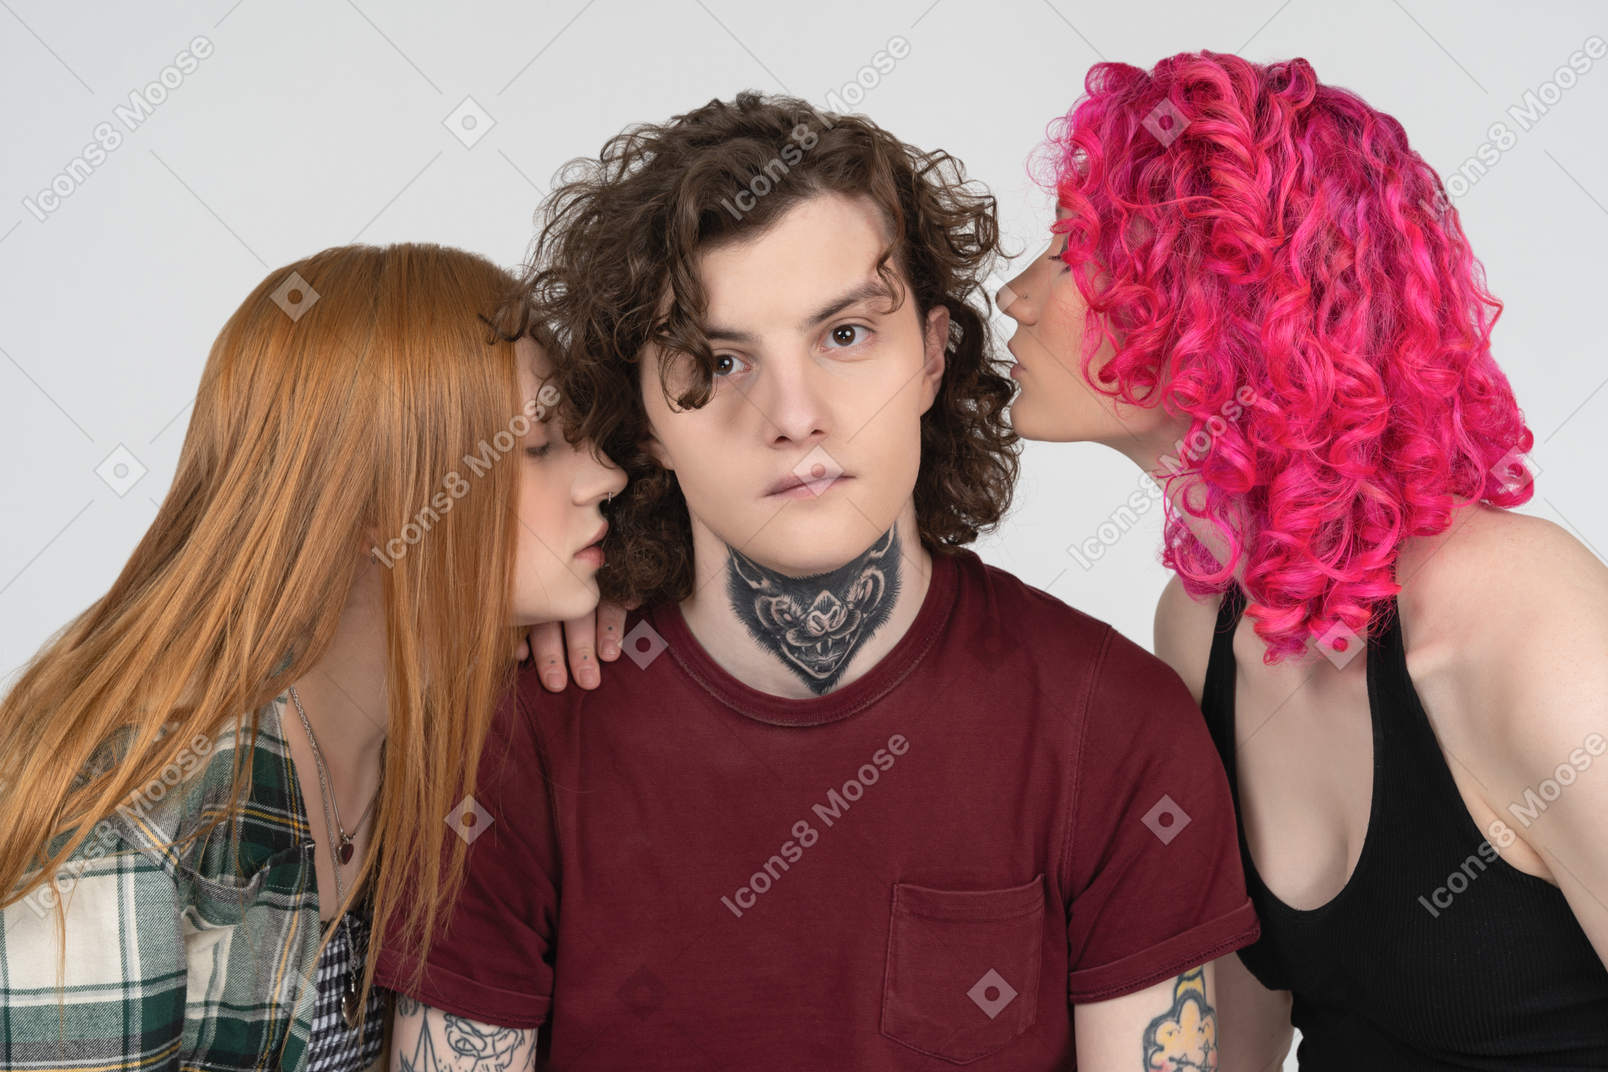 Two girls kissing a young man with a tattoo on his neck